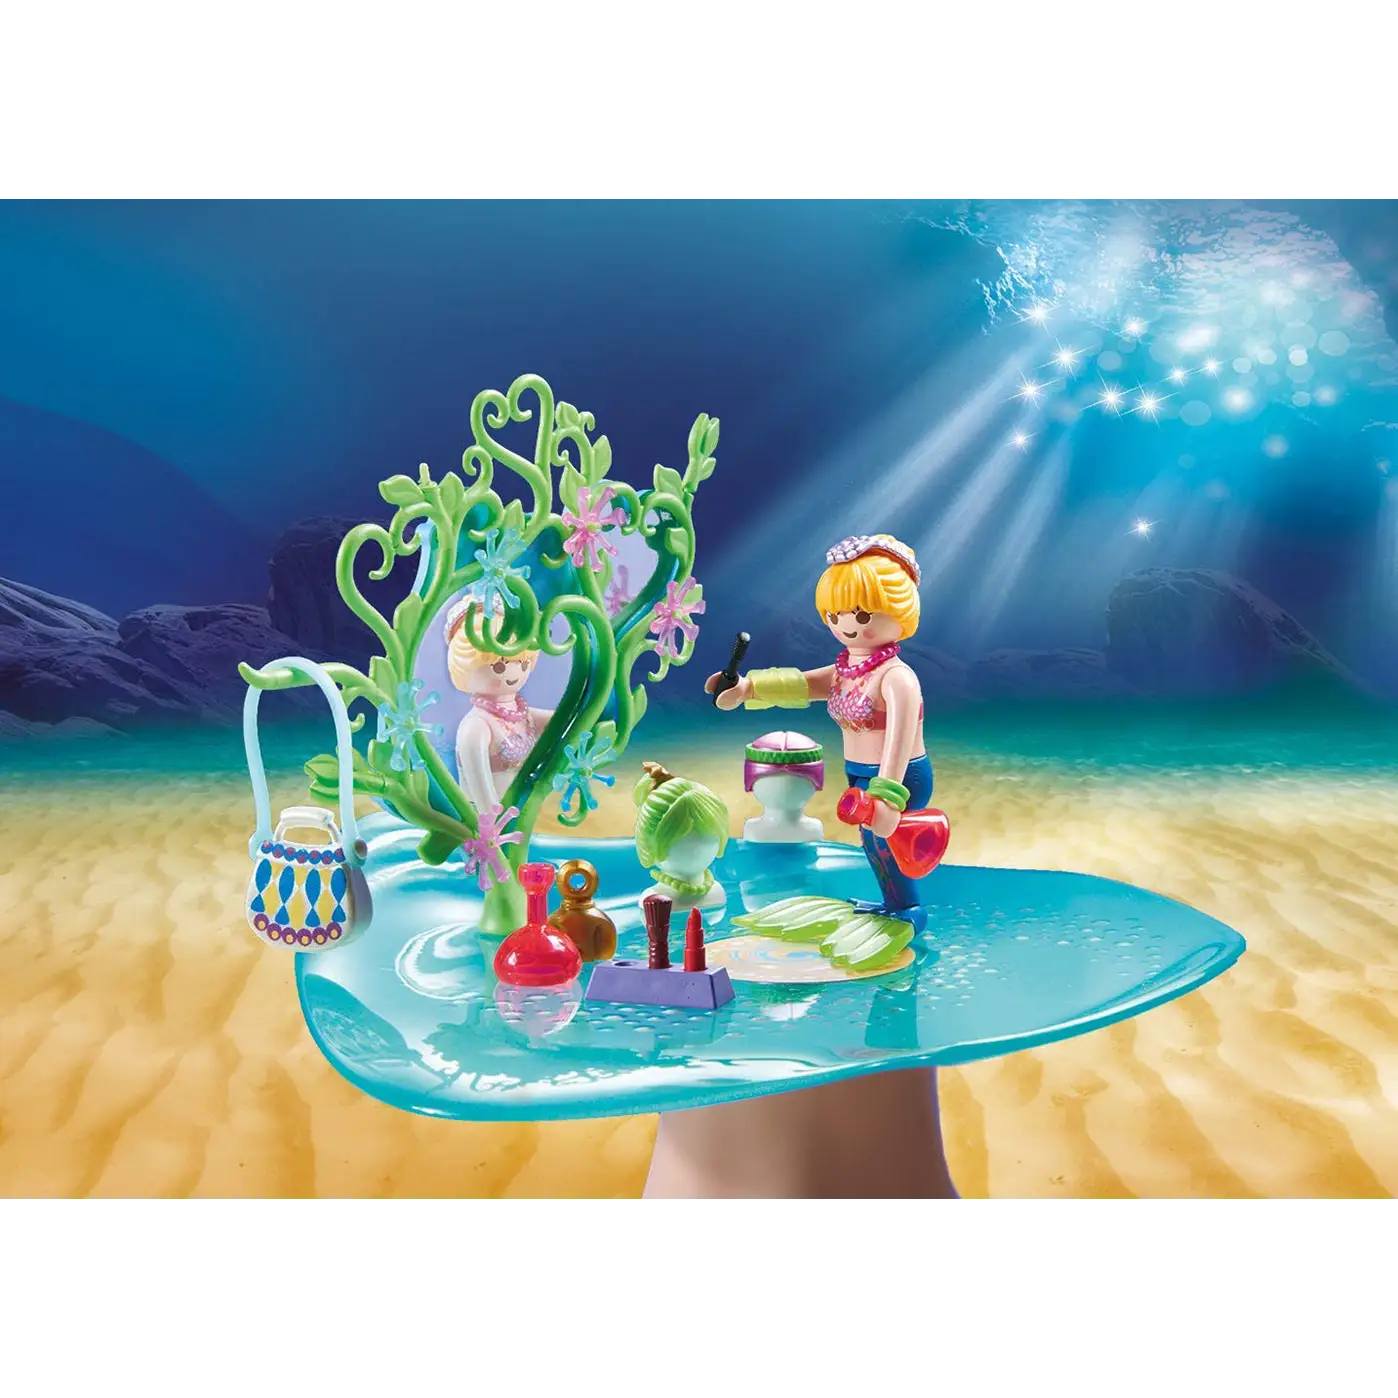 Playmobil Magic - Beauty Salon with Jewel Case 70096 (for